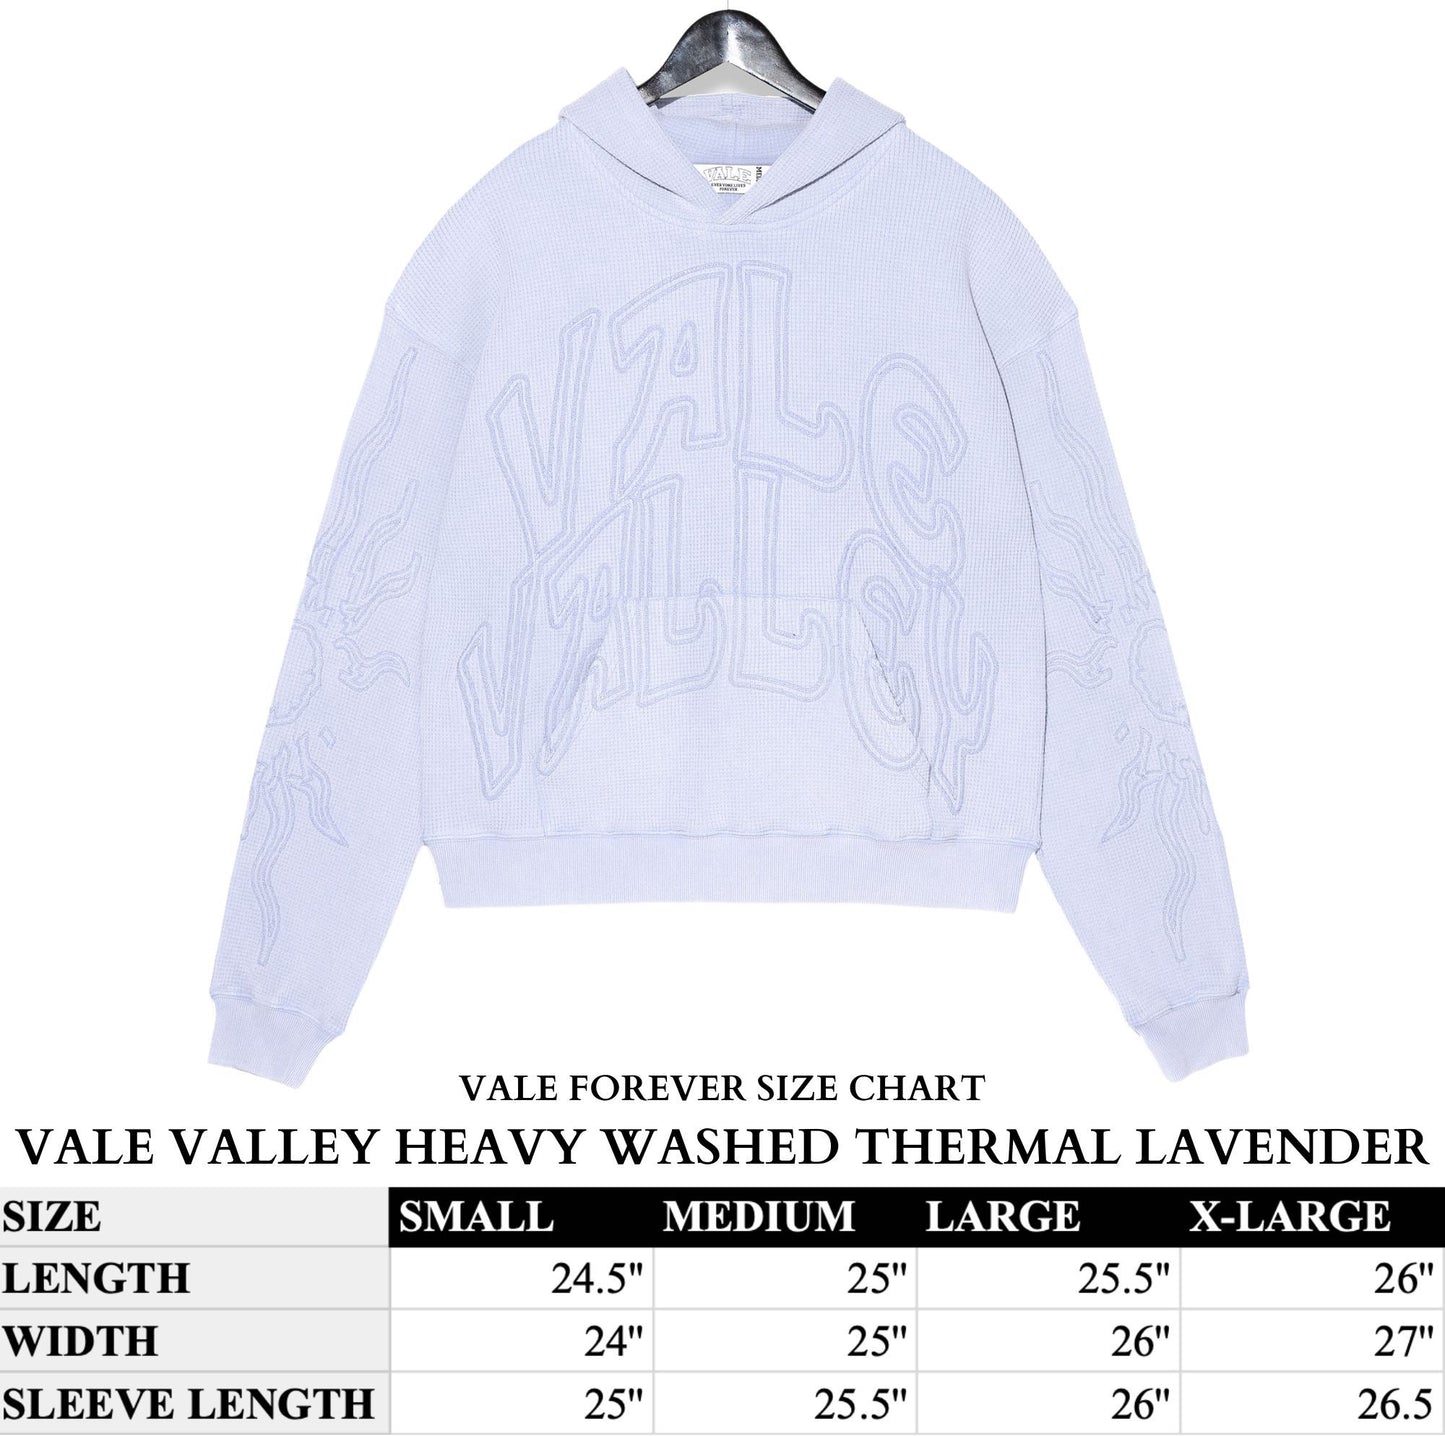 VALE VALLEY HEAVY THERMAL WASHED LAVENDER